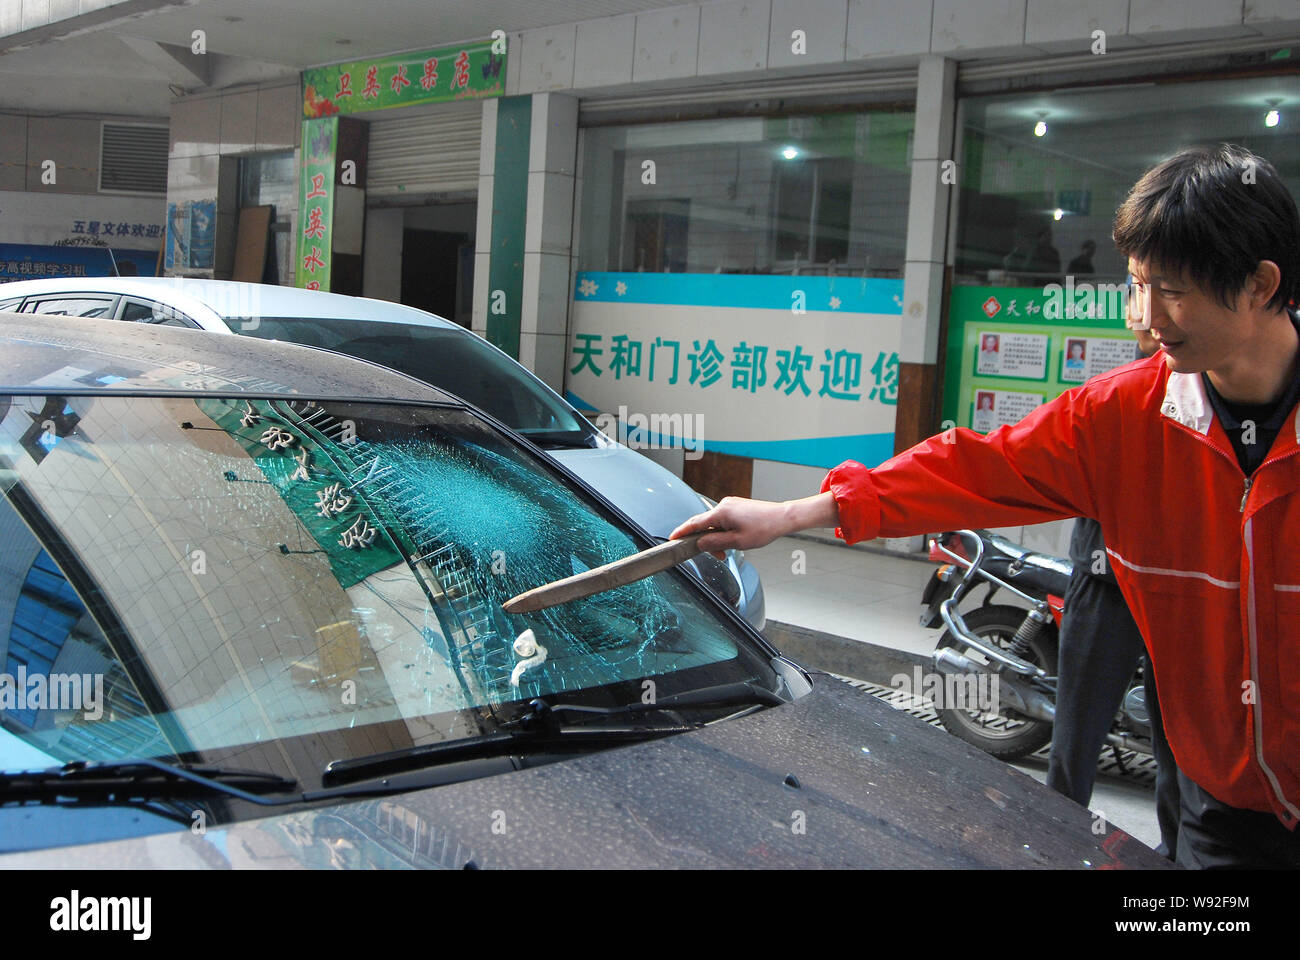 The car owner clears away the used condom from the shattered front windshield of his Chevrolet Cruze in Jiande city, east Chinas Zhejiang province, 5 Stock Photo